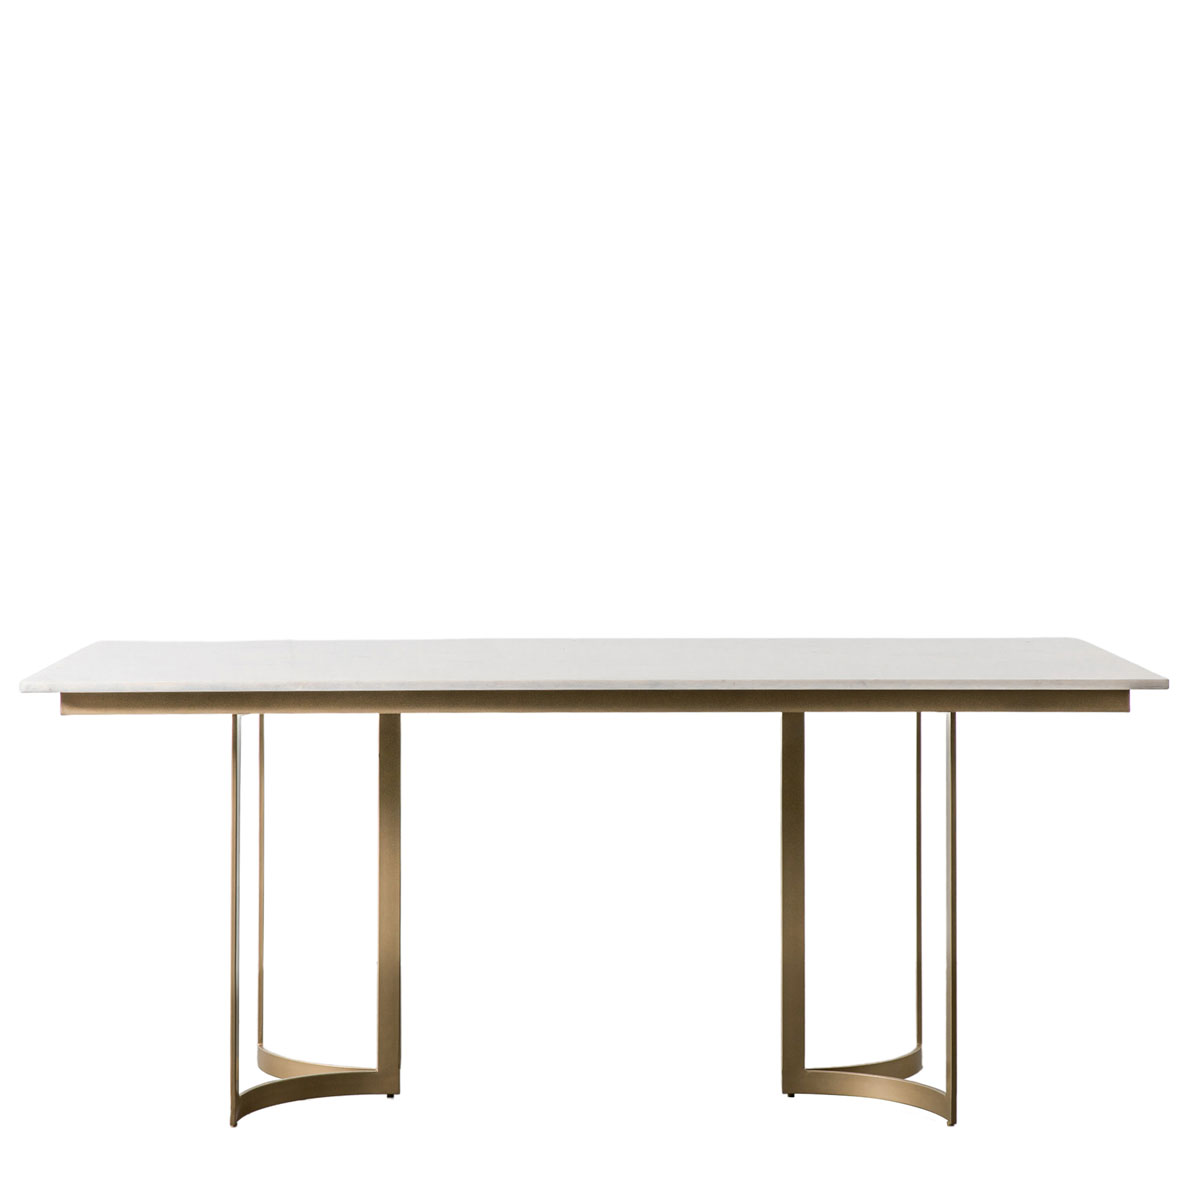 Everton Dining Table Gold 1800x900x760mm